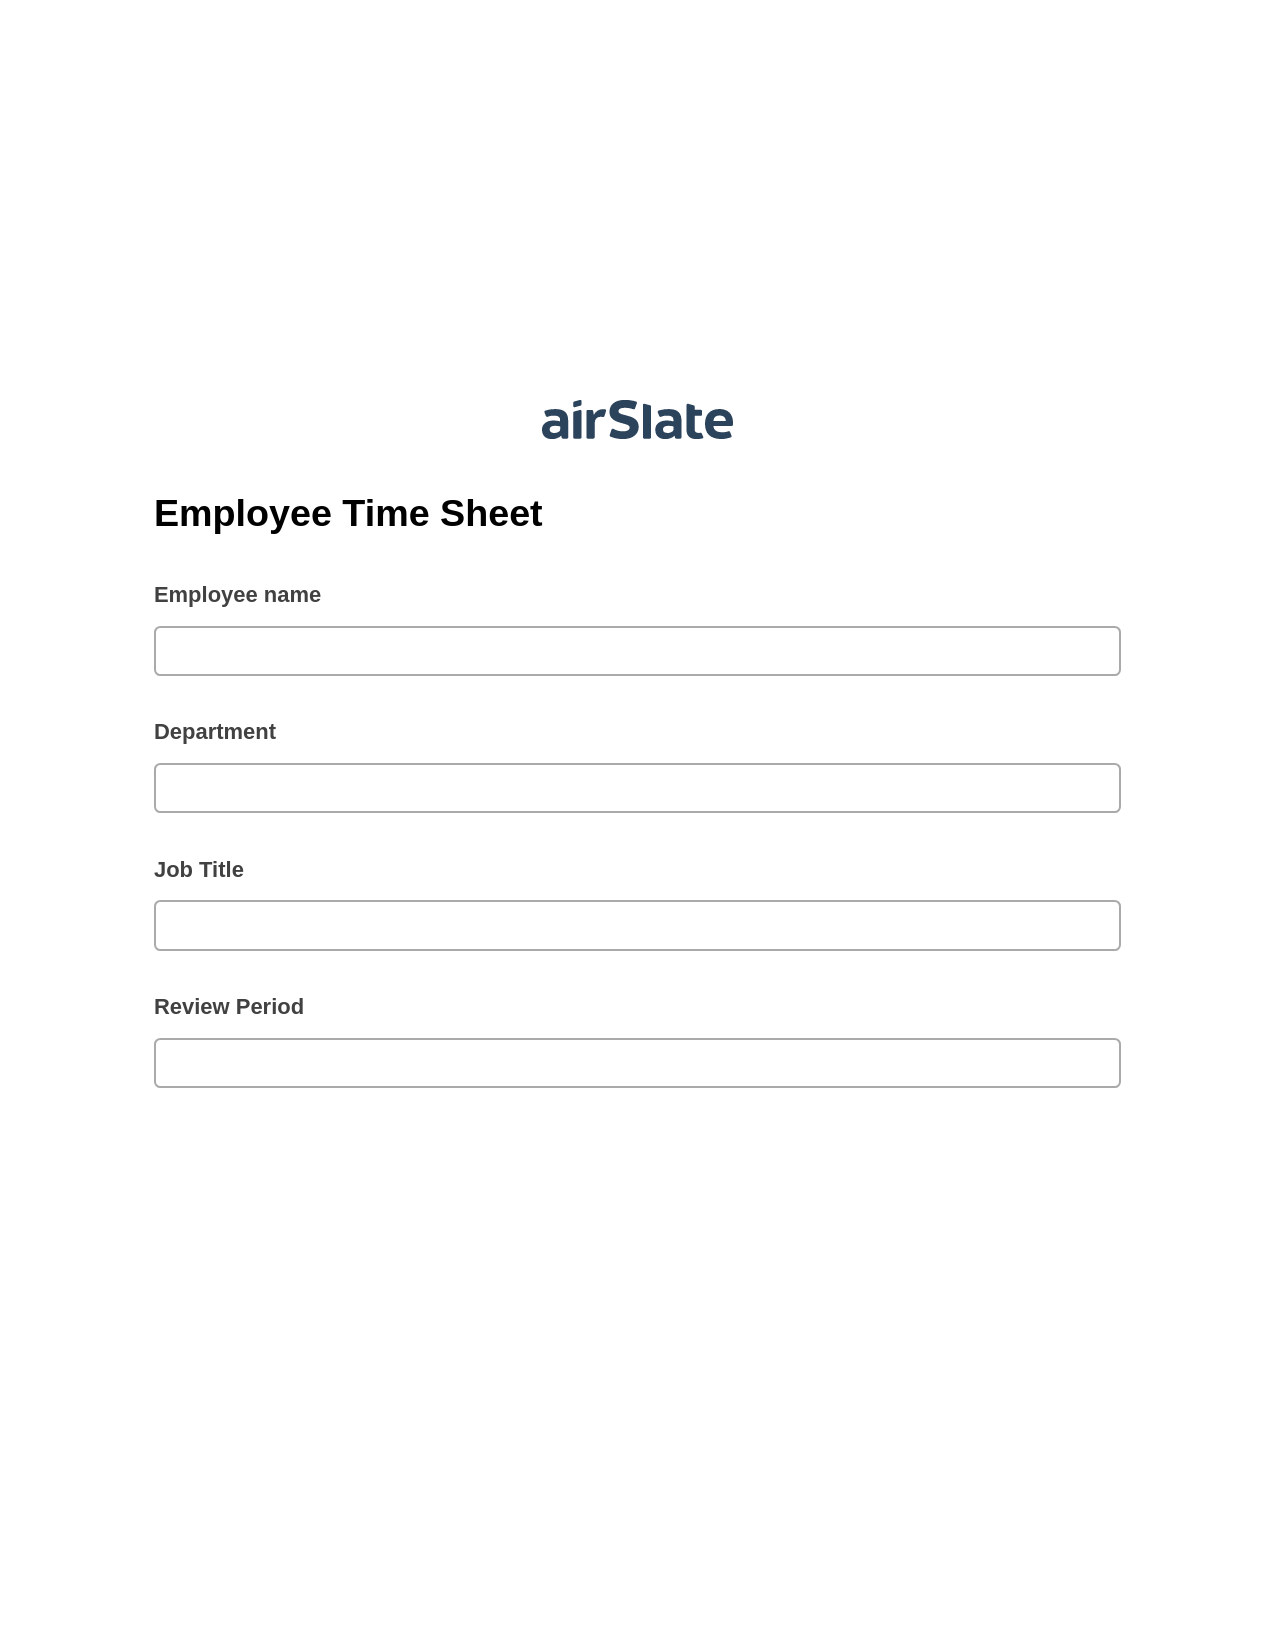 Employee Time Sheet Pre-fill Dropdowns from MySQL Bot, Remove Tags From Slate Bot, Export to Excel 365 Bot